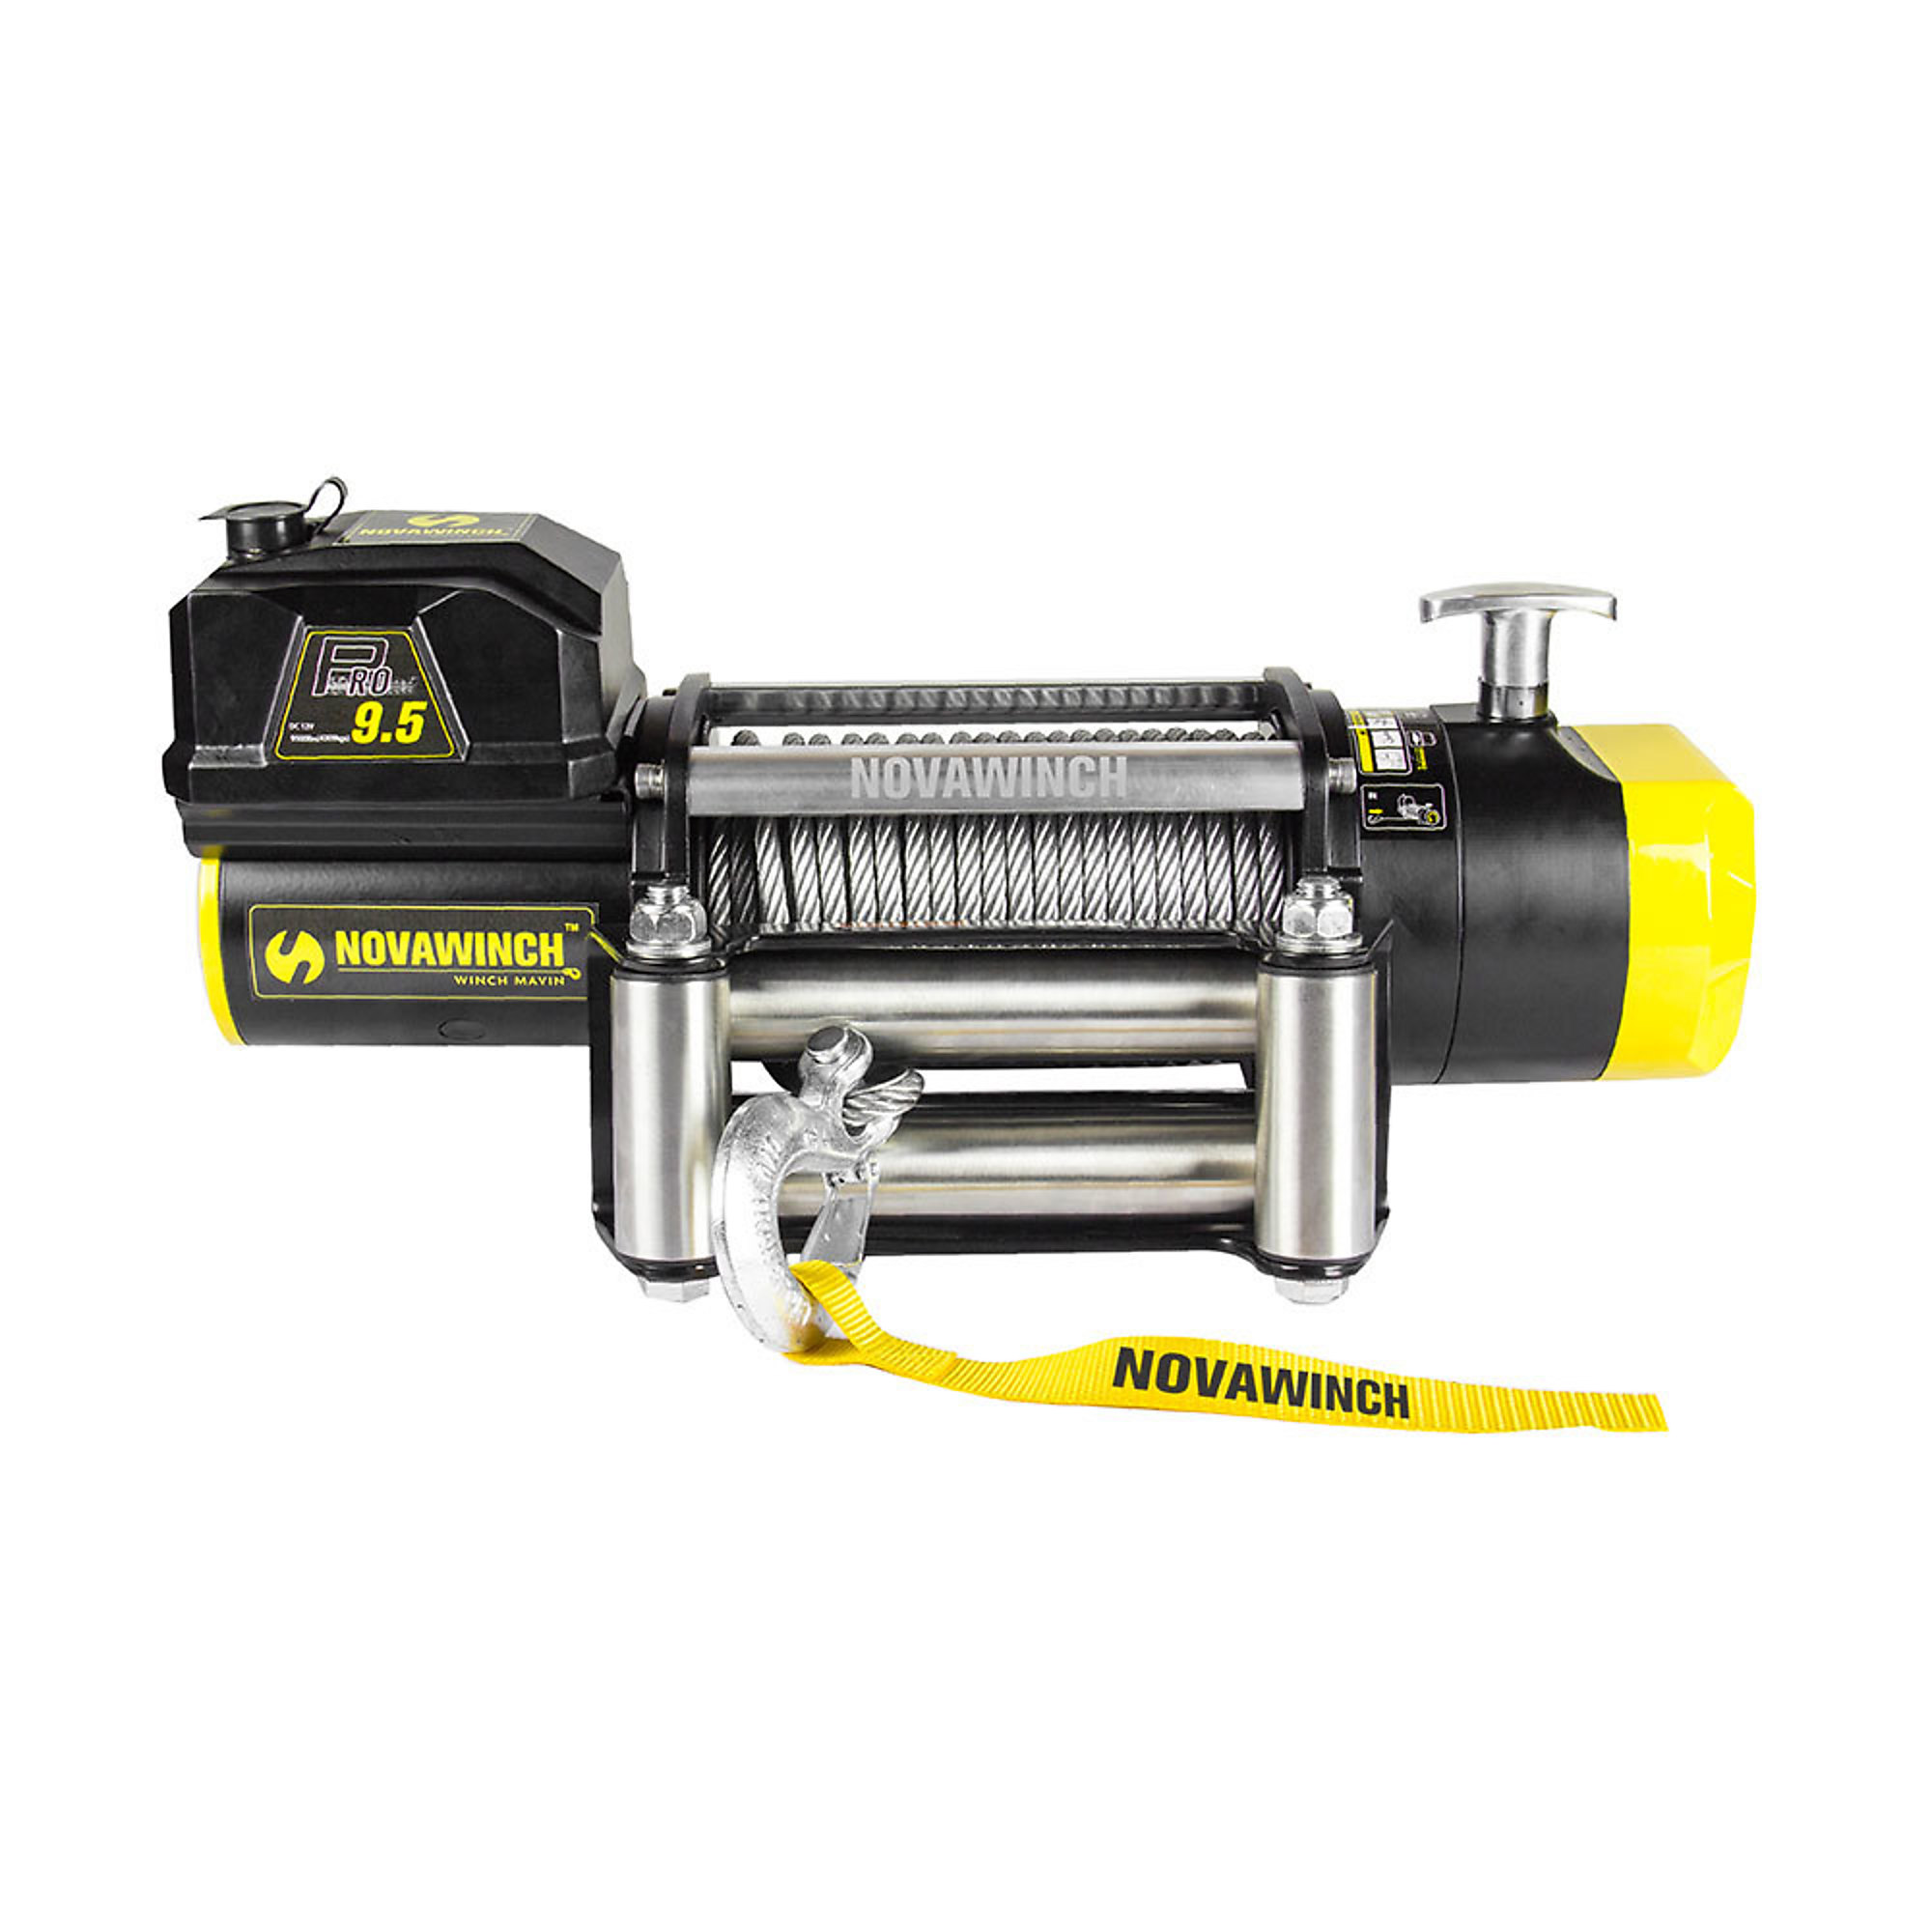 Novawinch, Truck/Trailer 12V DC Powered Winch, Capacity (Line Pull) 9500 lb, Volts 12, Max. Amps 360, Model 701001068581